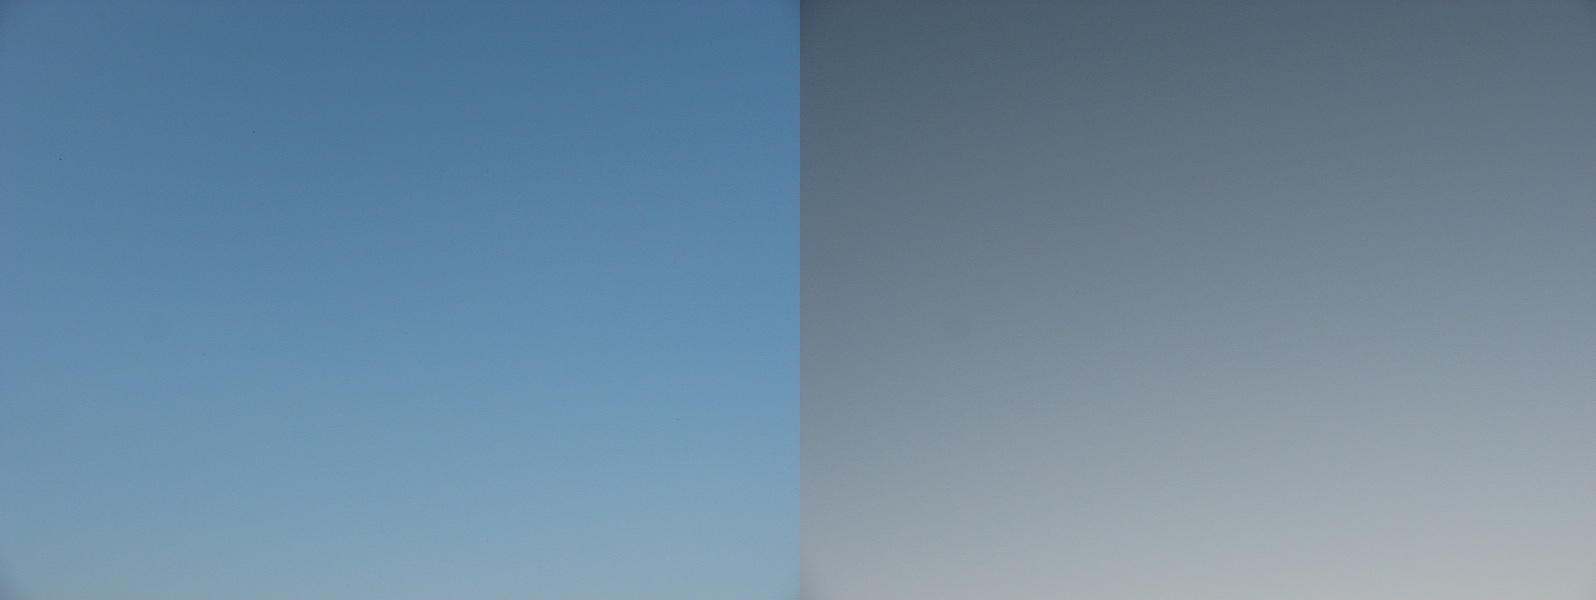 Evening sky comparison in terms of haze concentration